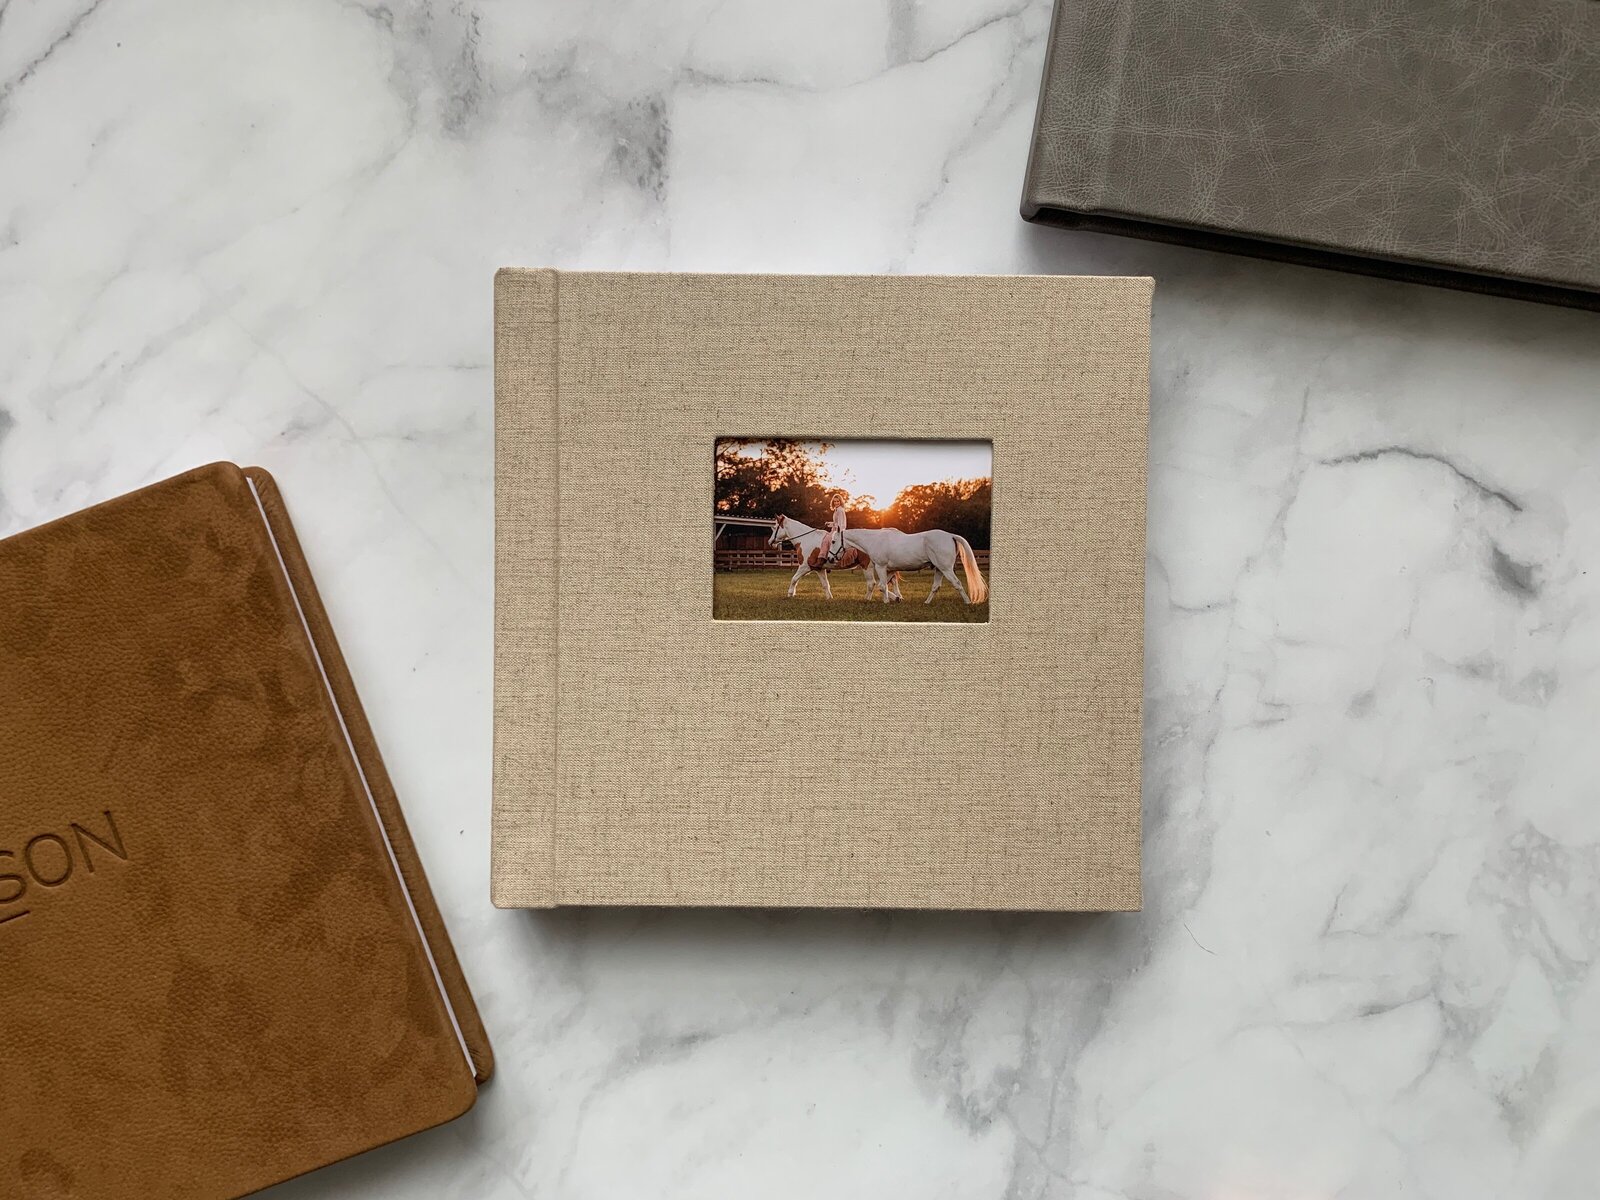 Luxury linen photo album of horse and rider created by Florida equine photographer.